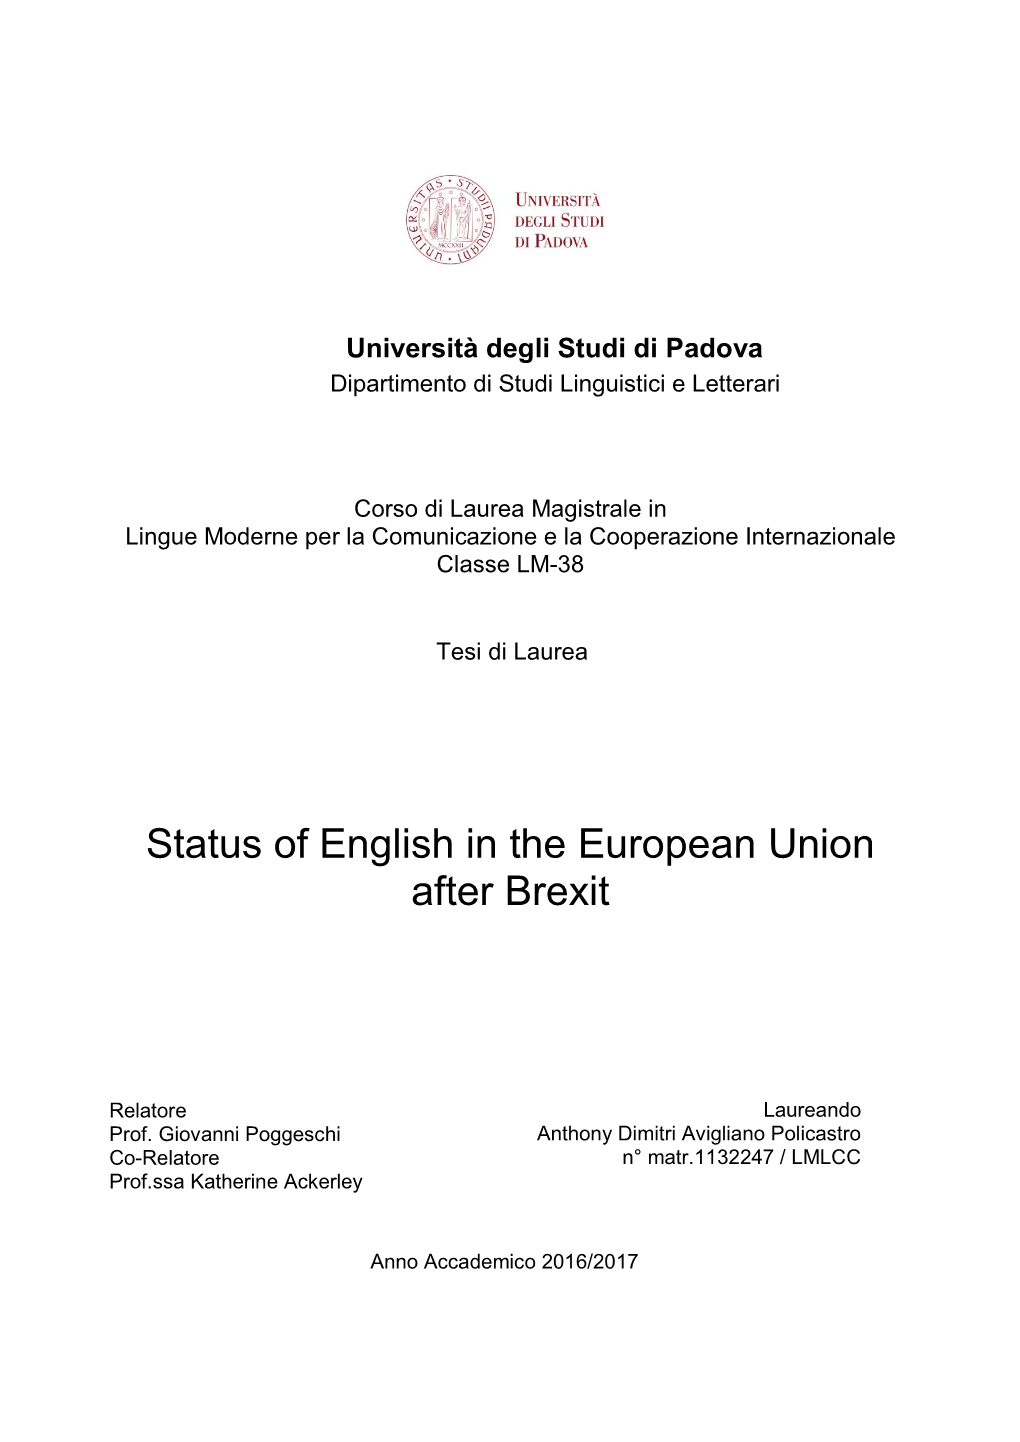 Status of English in the European Union After Brexit